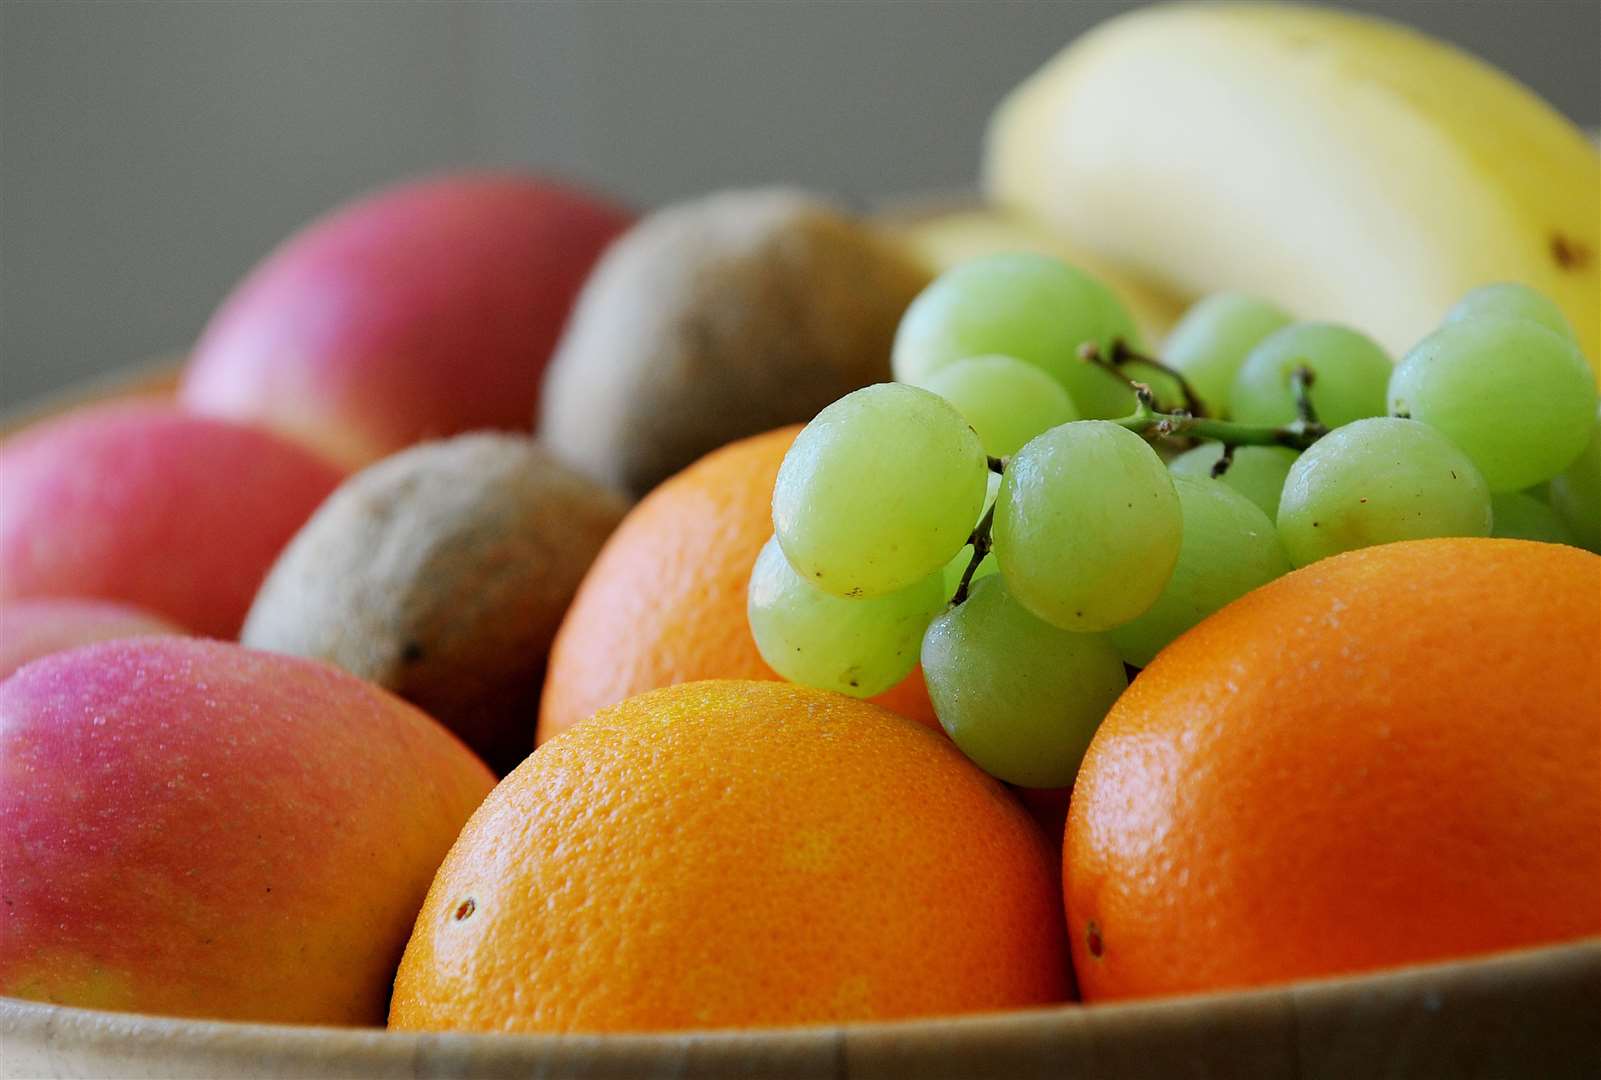 Fruit may not be as healthy as it has been marketed